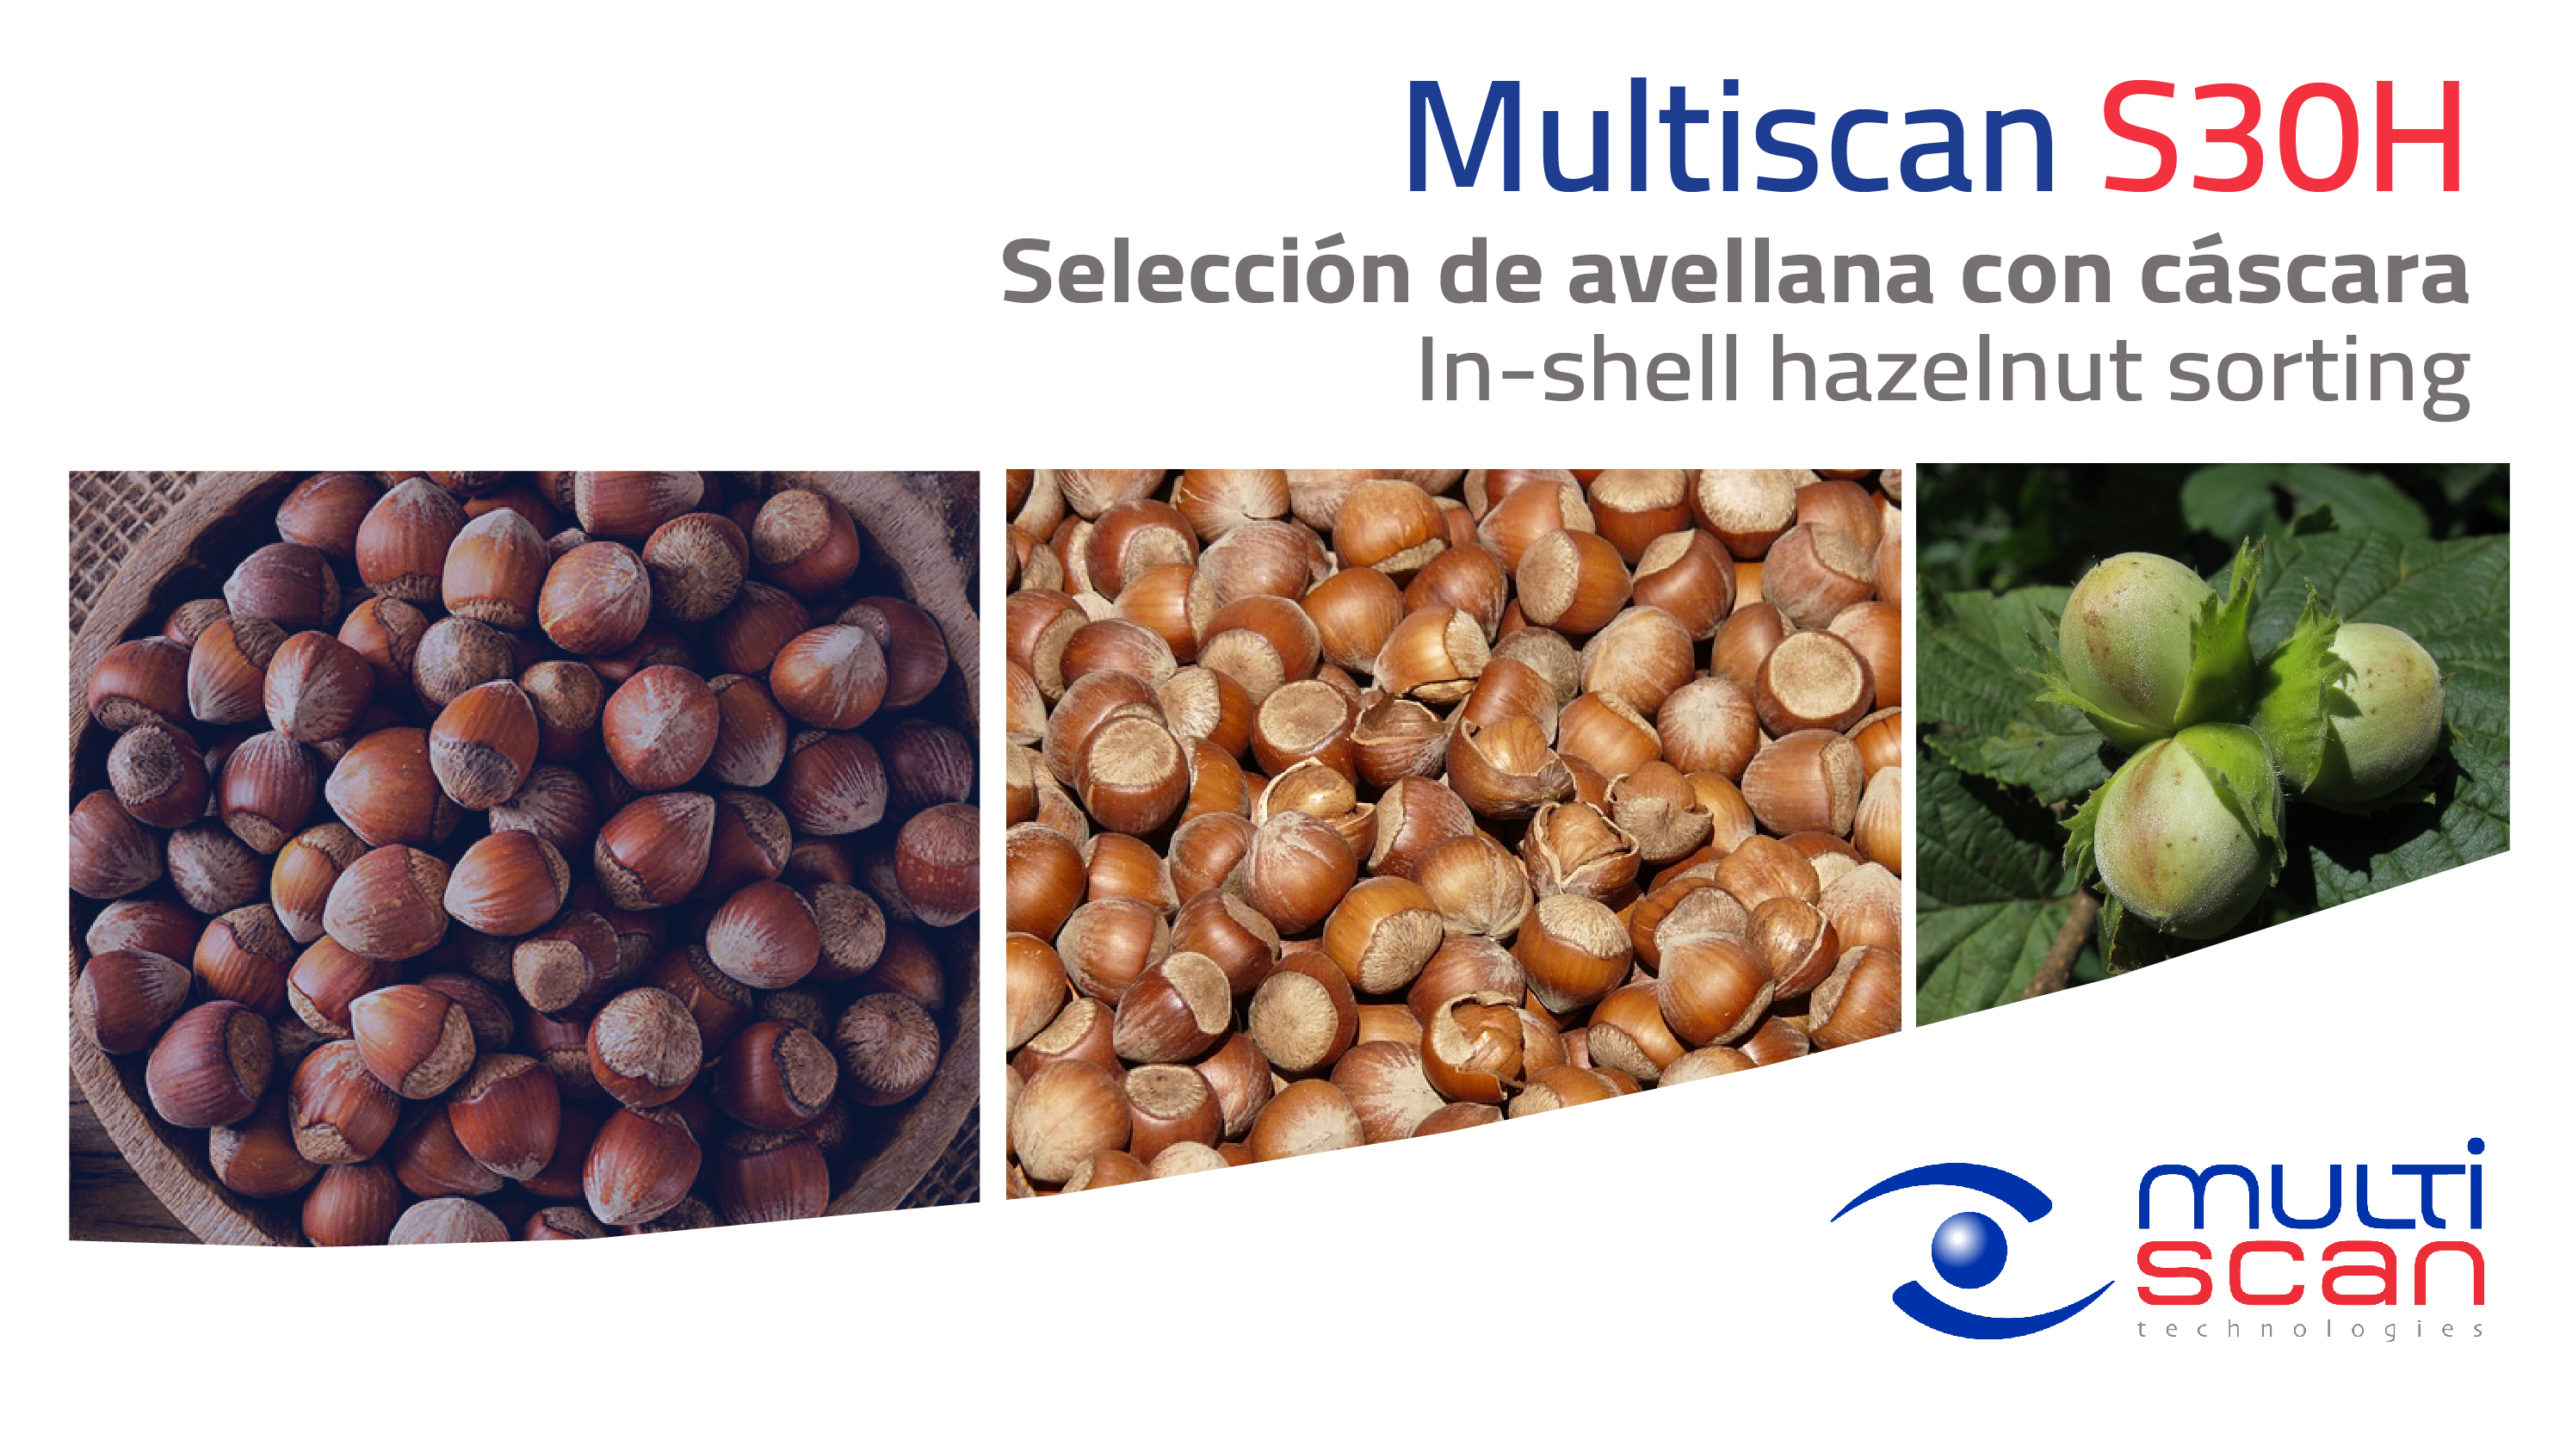 Multiscan S30H for hazelnut quality sorting